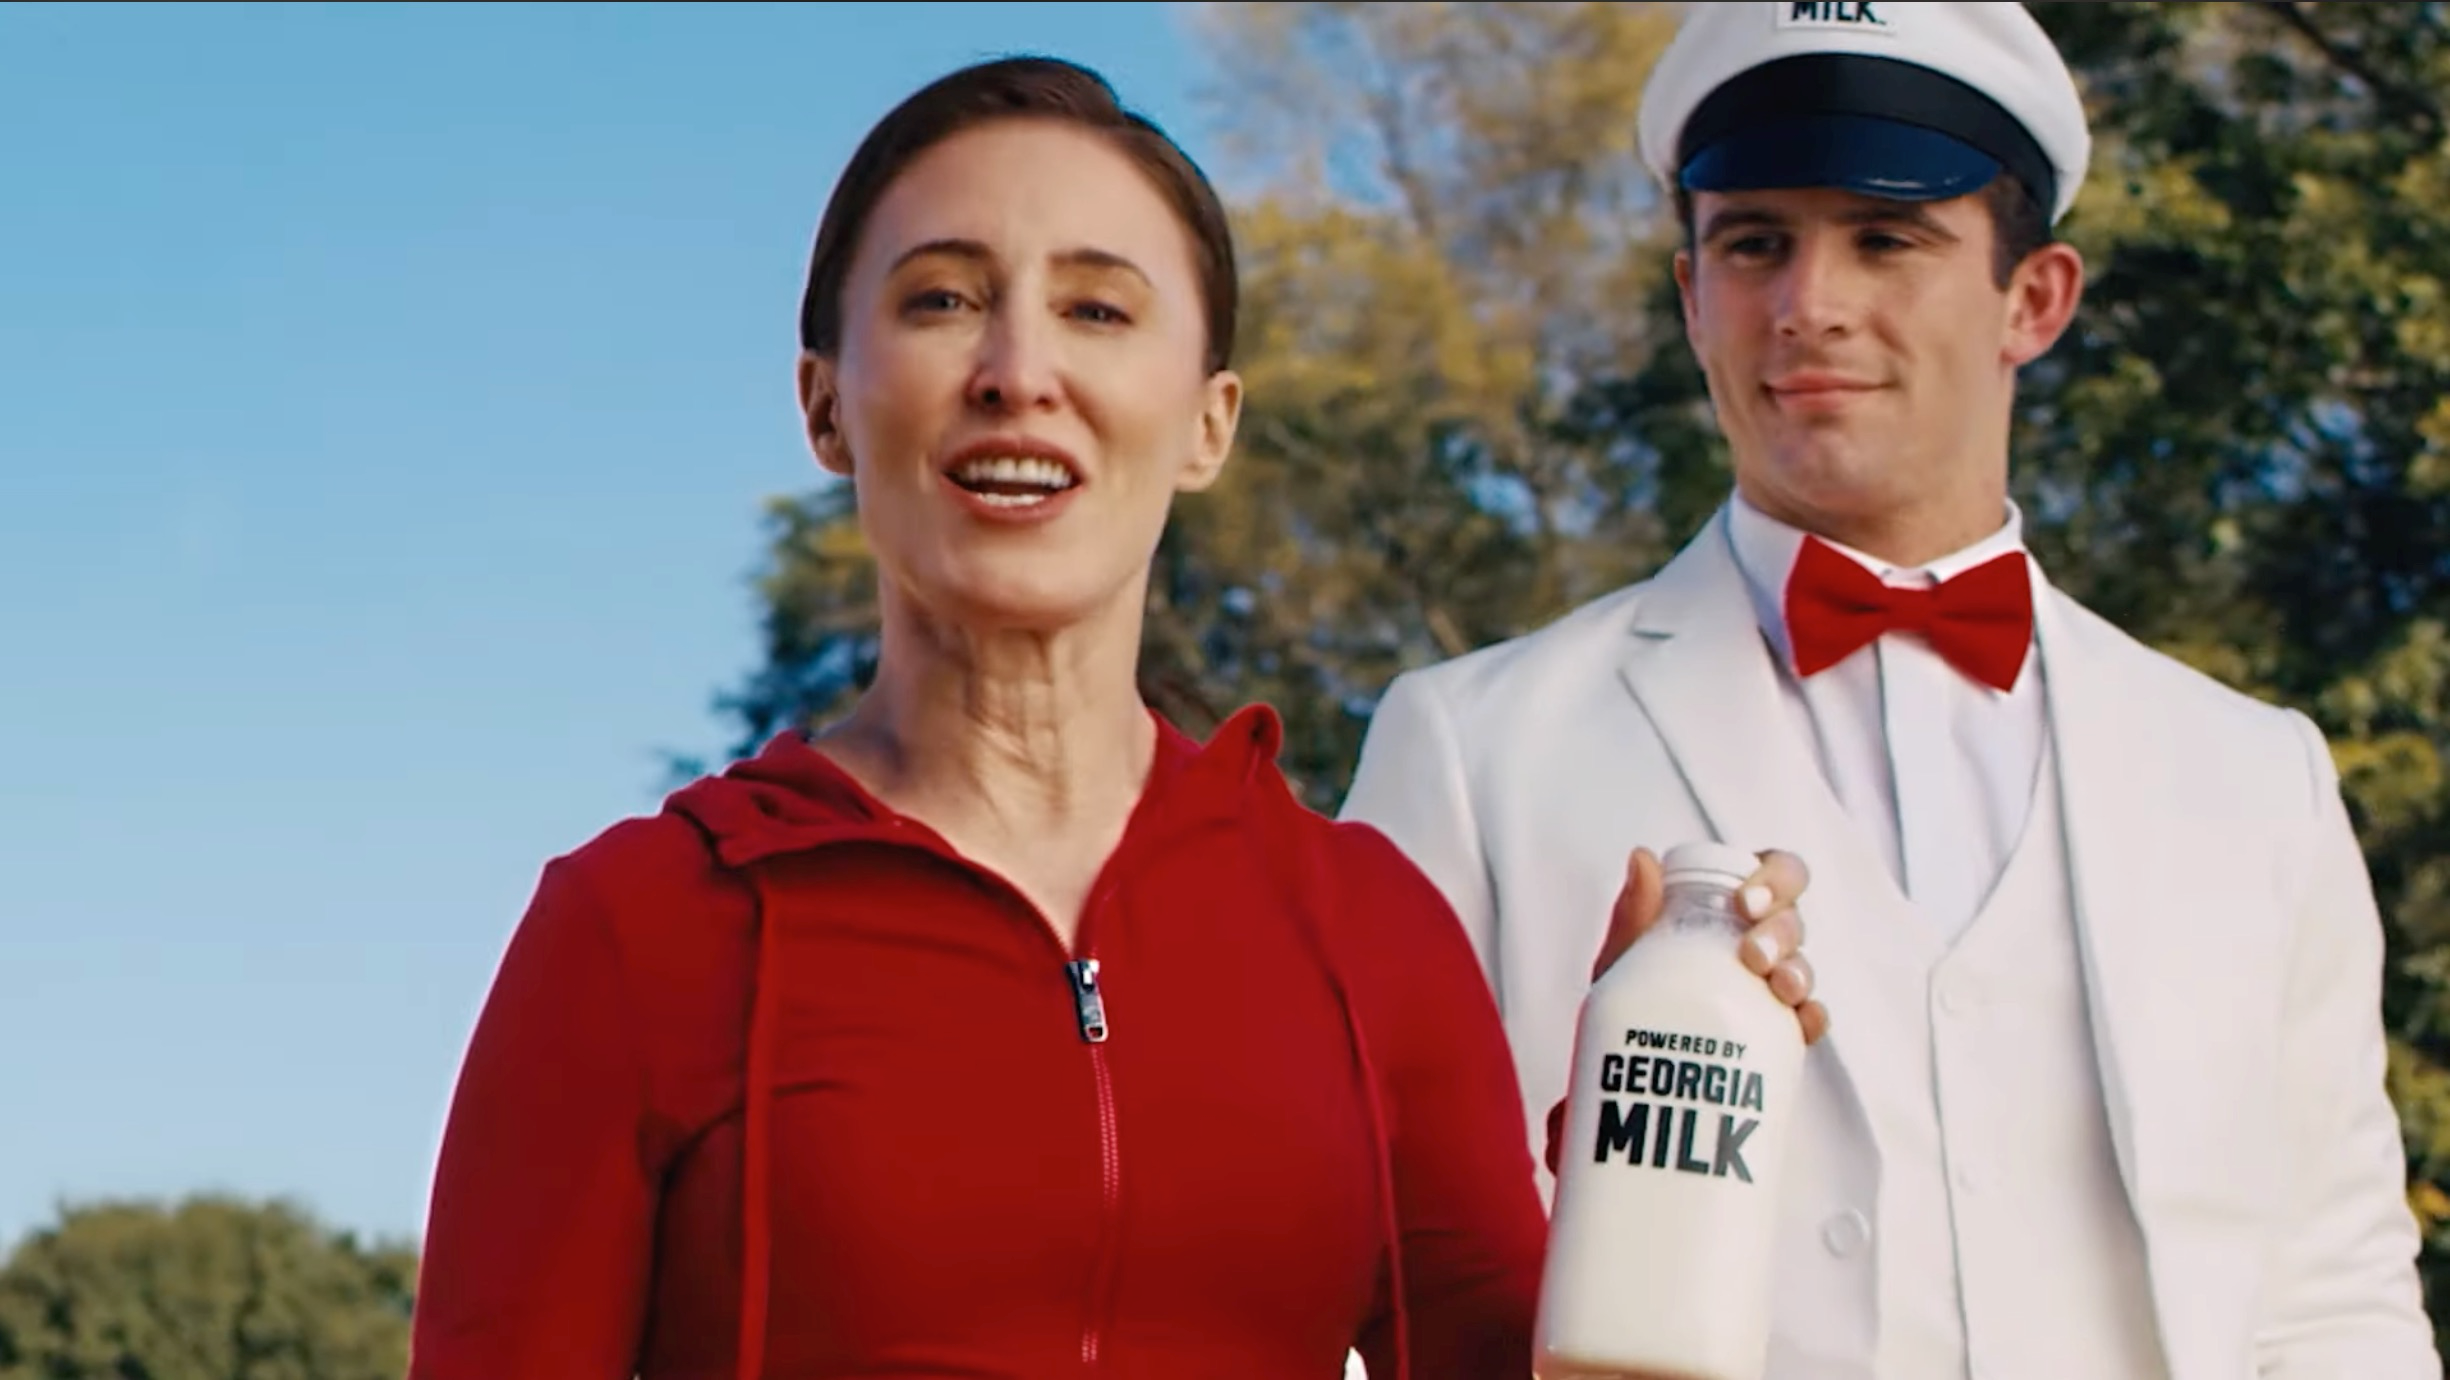 Milk Delivers with Stetson Bennett and Marie Spano